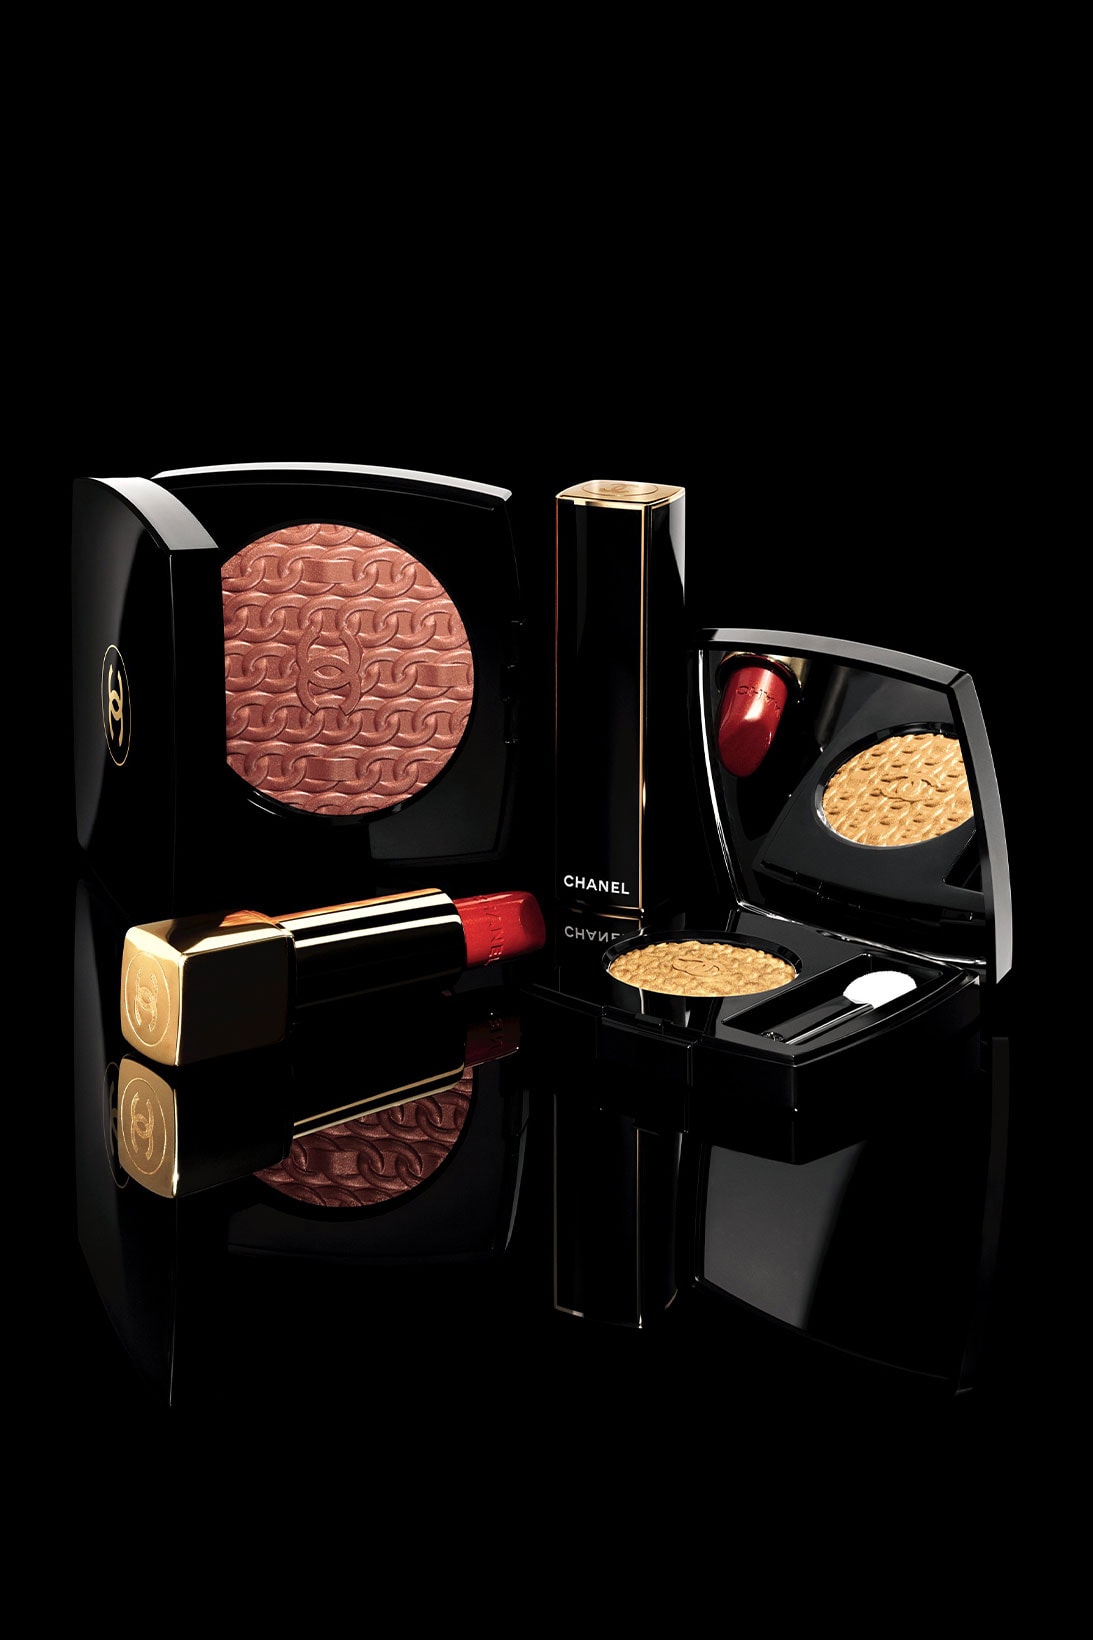 chanel beauty holiday collection lipsticks blush powders eyeshadows nail polish rouge allure le vernis 